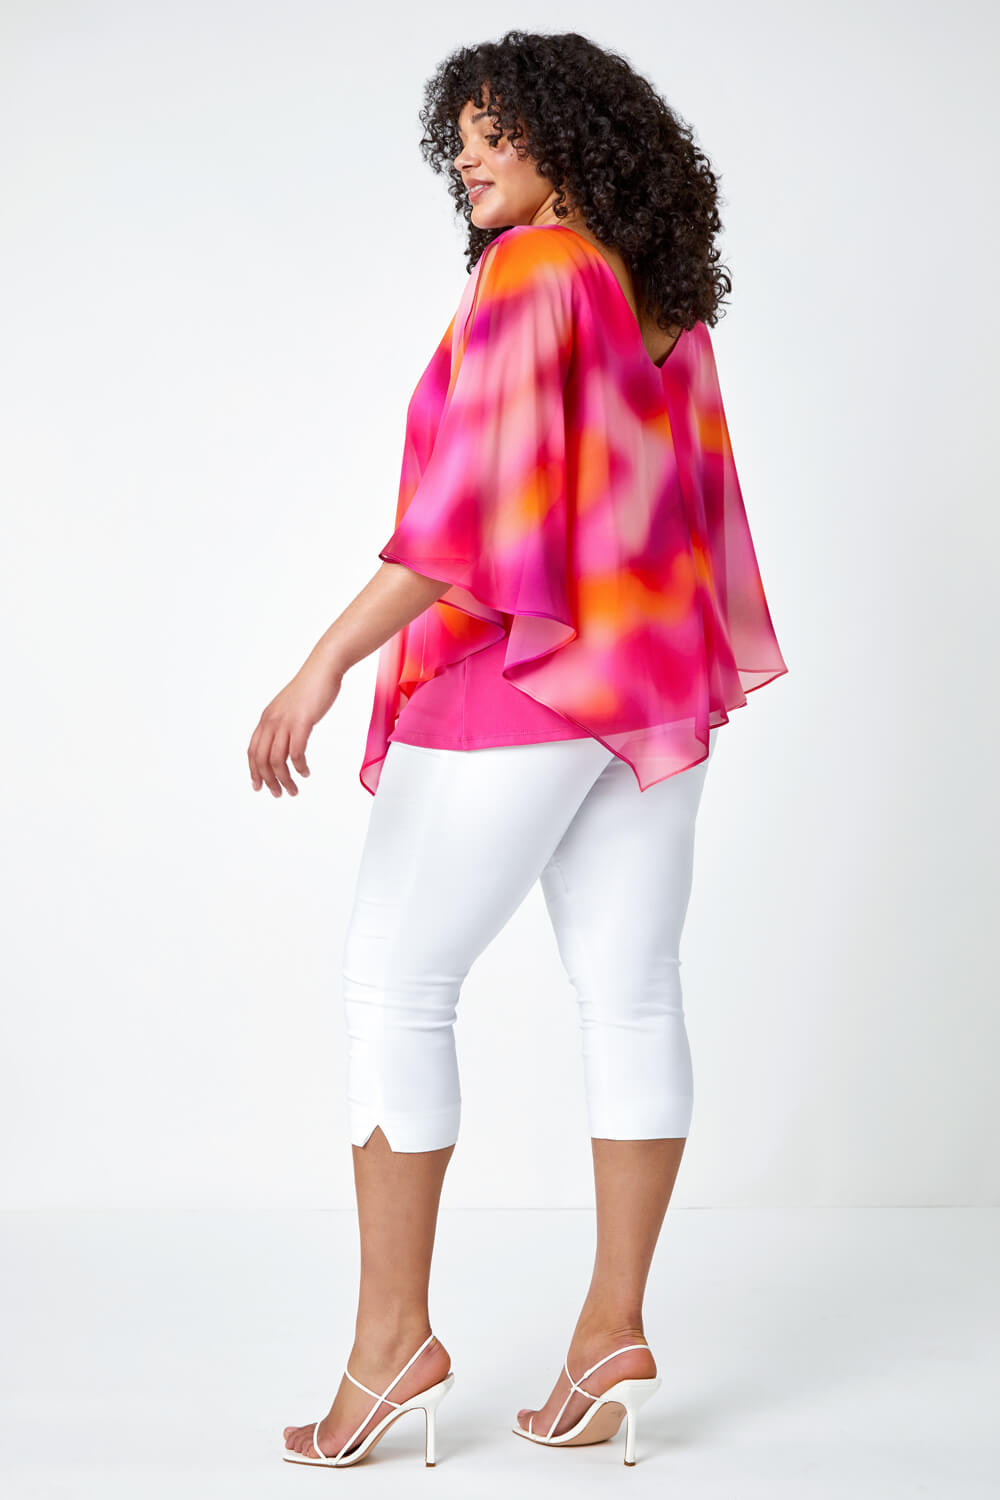 PINK Curve Ombre Print Chiffon Overlay Top, Image 3 of 5